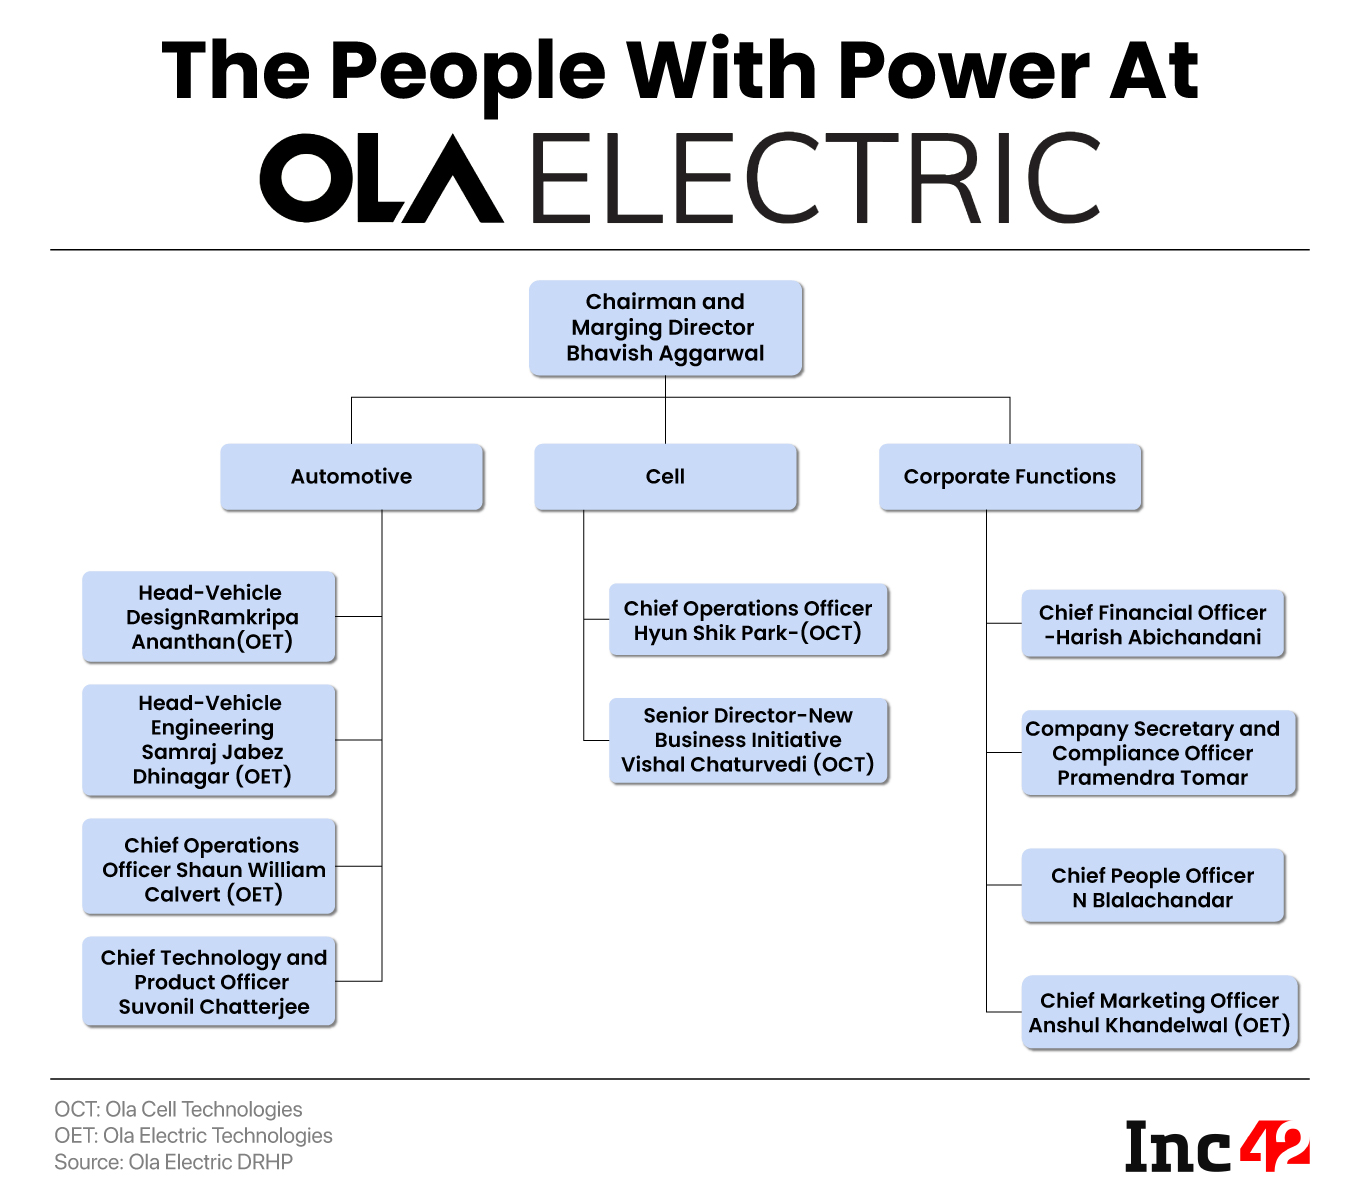 People in power at Ola Electric